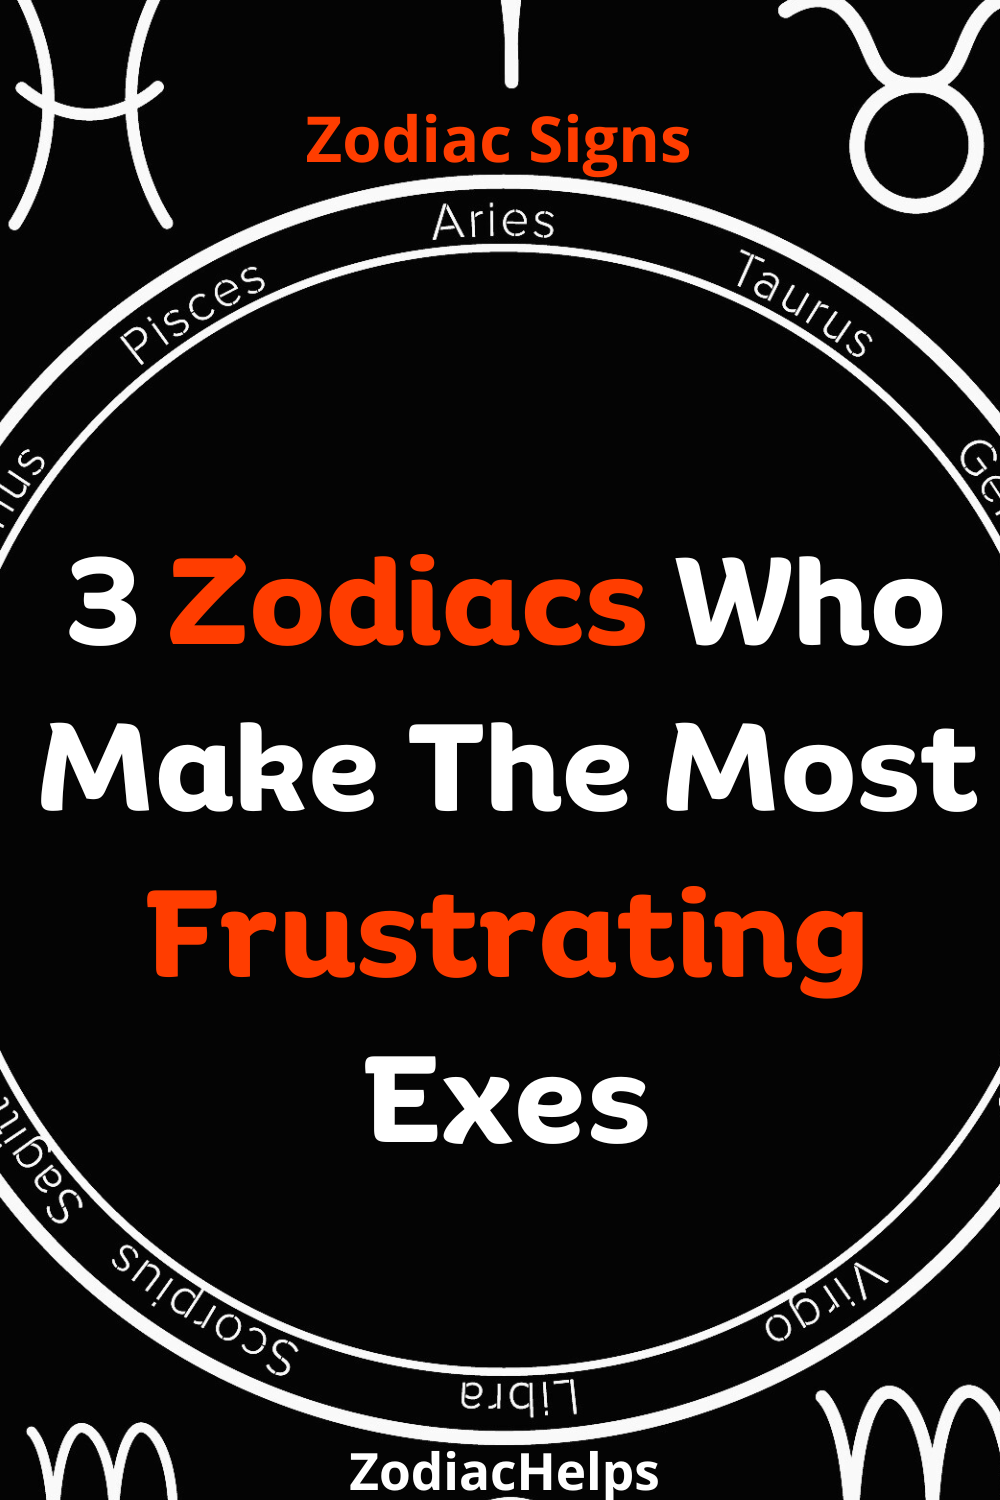 3 Zodiacs Who Make The Most Frustrating Exes